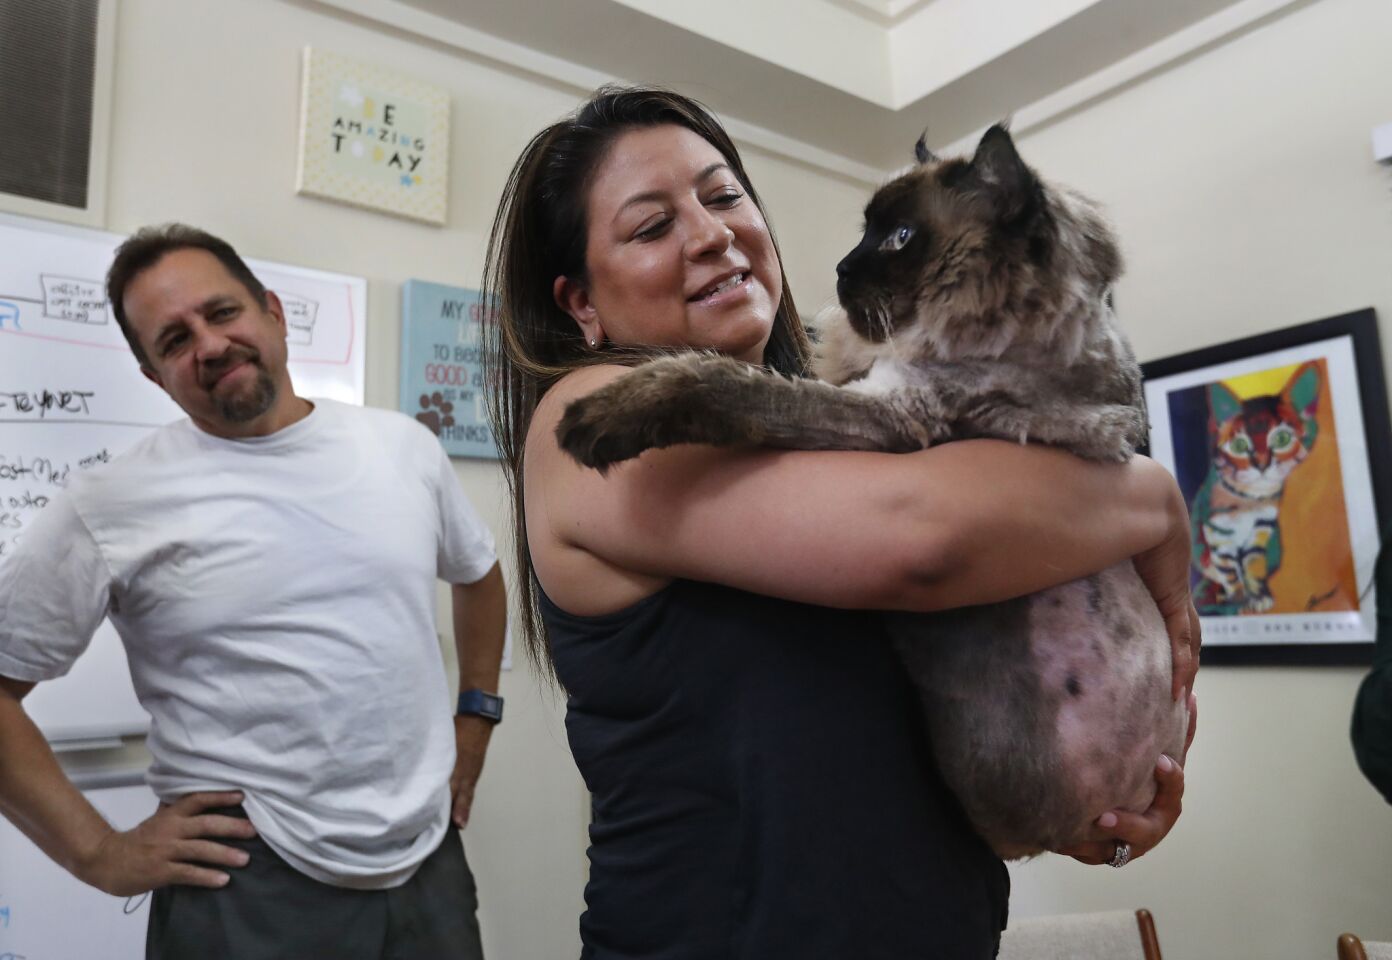 Yvette Viola of Monrovia holds Chubbs for the first time before adopting him at the Pasadena Humane Society. The cat, who was found walking along an Altadena street, weighed 29 pounds when he arrived at the shelter.